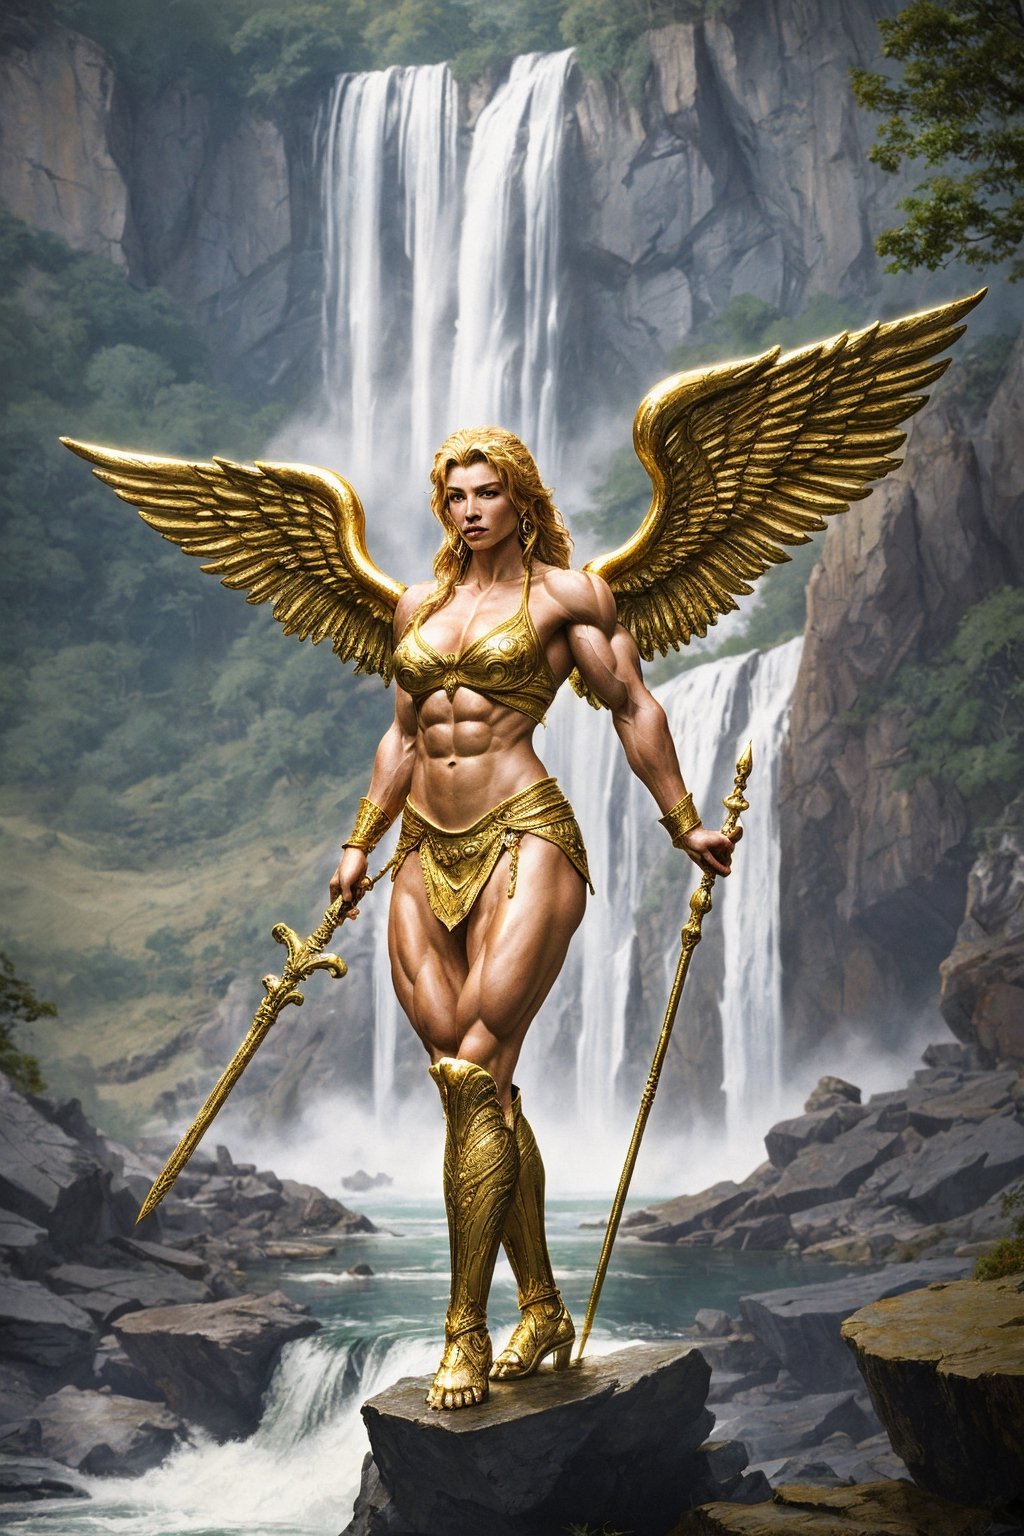 A muscular female Lionperson with wings totally made of  gold holding a large spear standing on a outcropping in front of a magnificent waterfall, Photorealistic quality